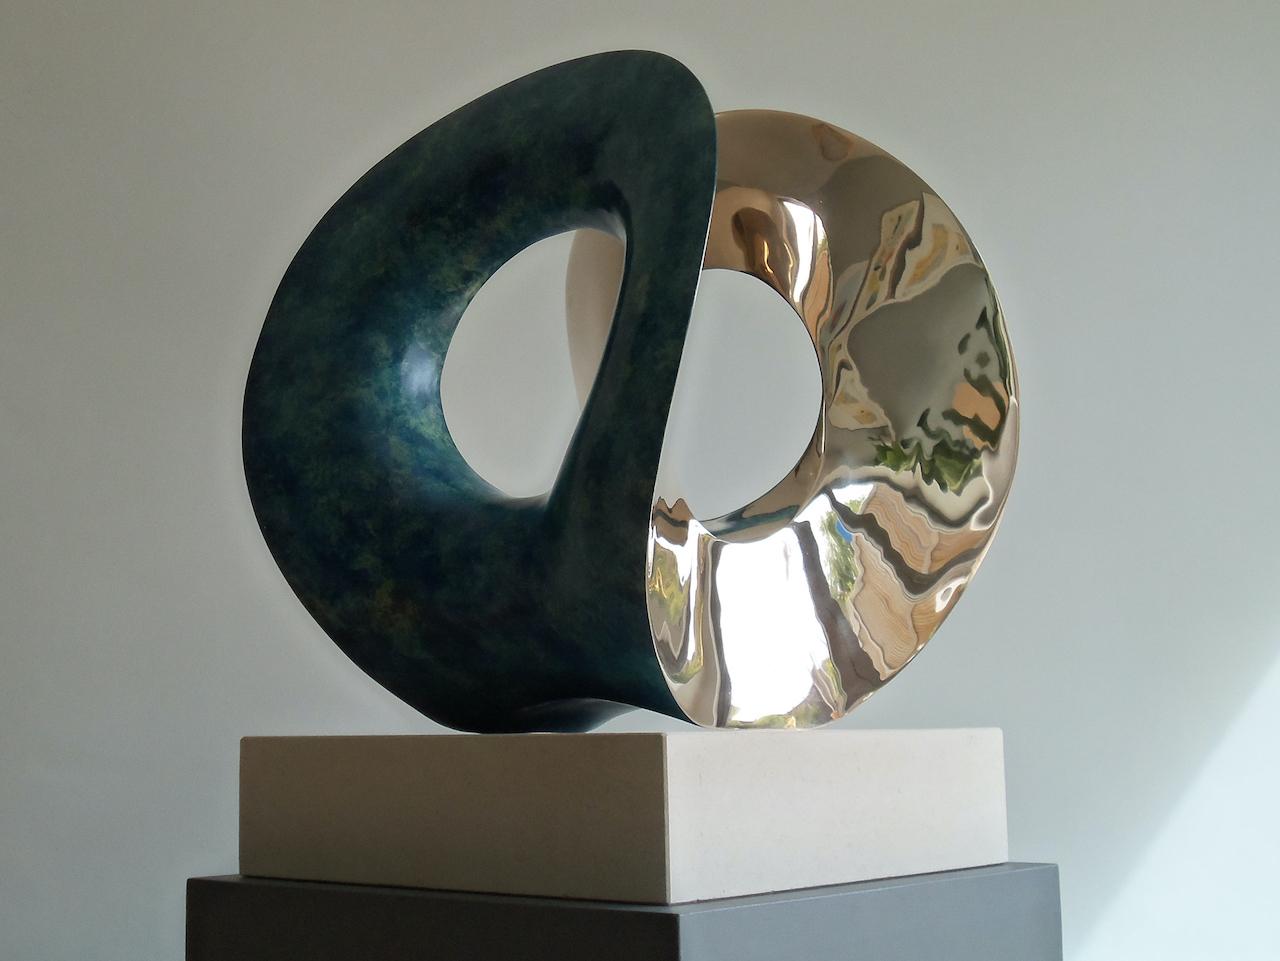 'Orchid' by British sculptor Thomas Joynes resulted from the artist's long fascination with the works of Naum Gabo and his role in the Constructivism movement. One of Gabo’s pieces that was of particular influence to him from college days was